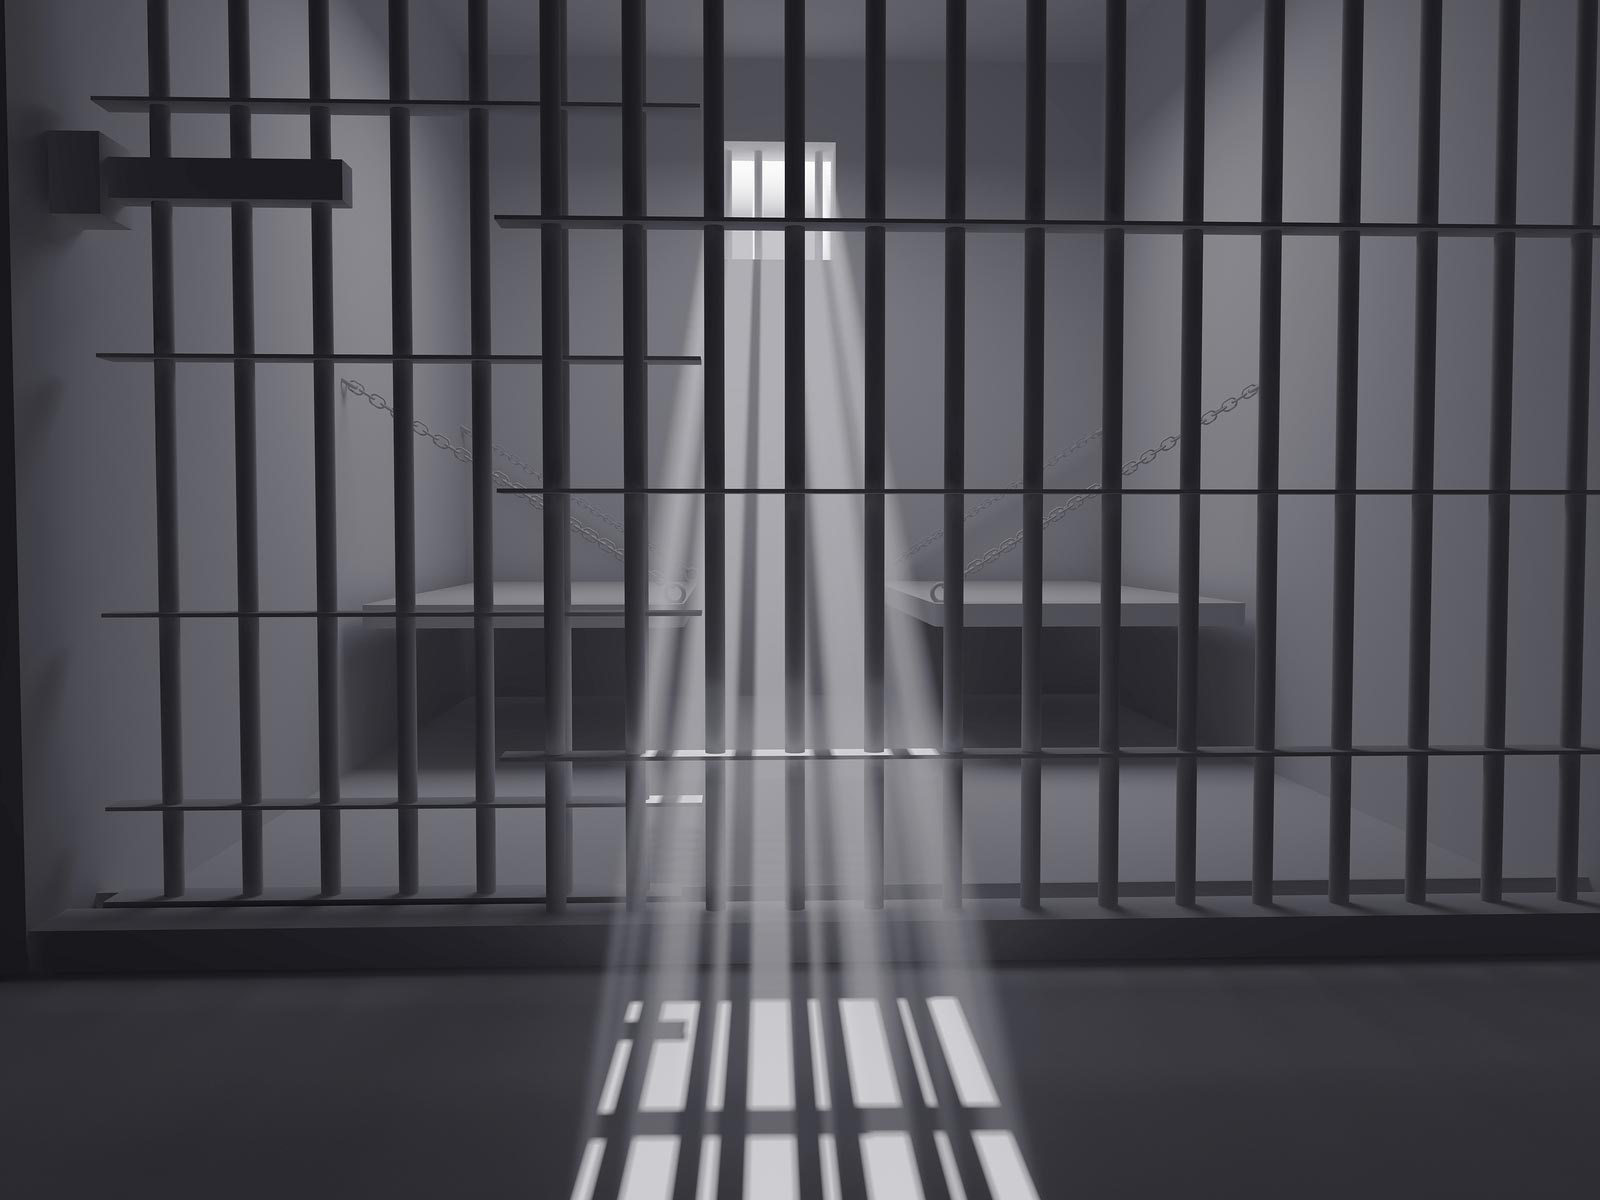 Related Jail Wallpaper Background Prison